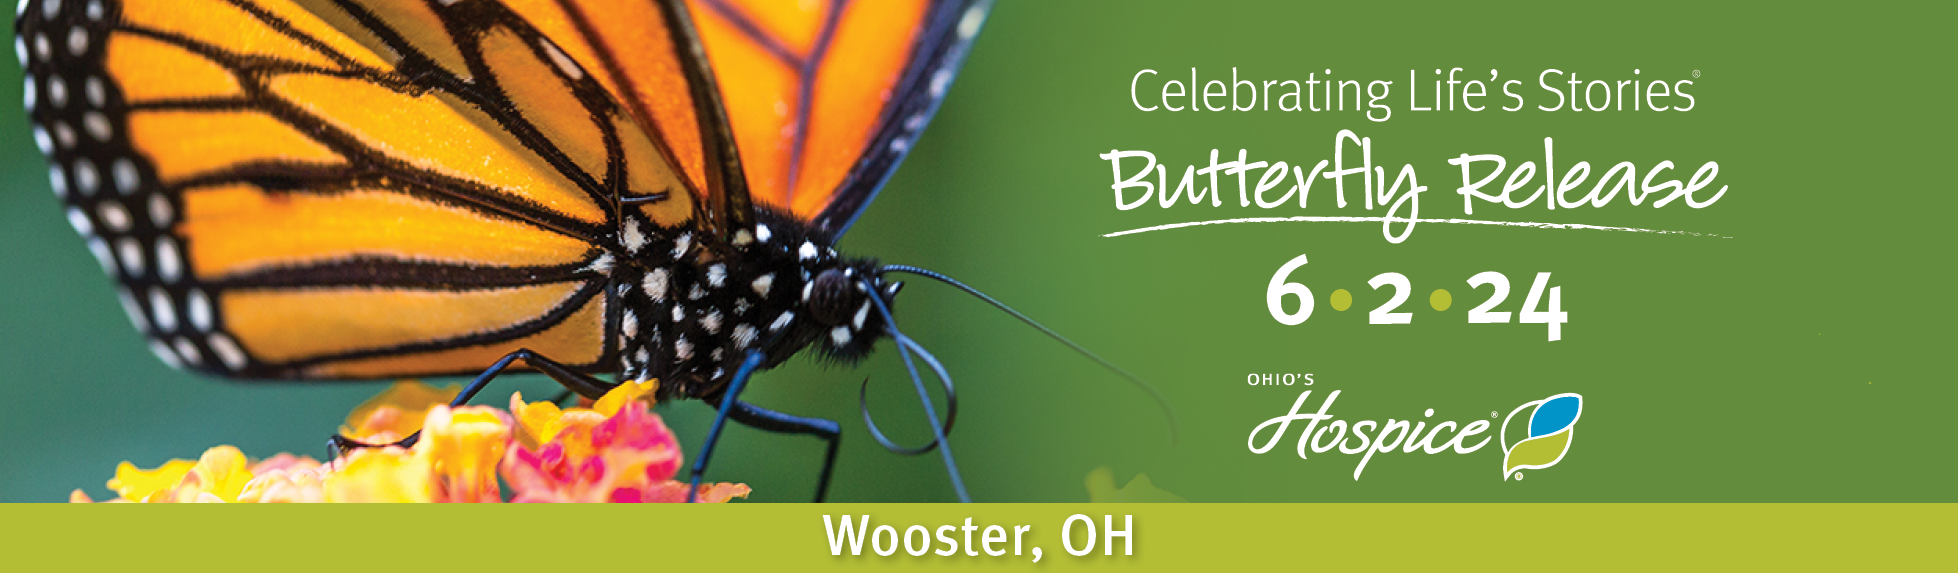 Ohio's Hospice LifeCare 2024 Butterfly Release 6.2.24 Wooster, OH